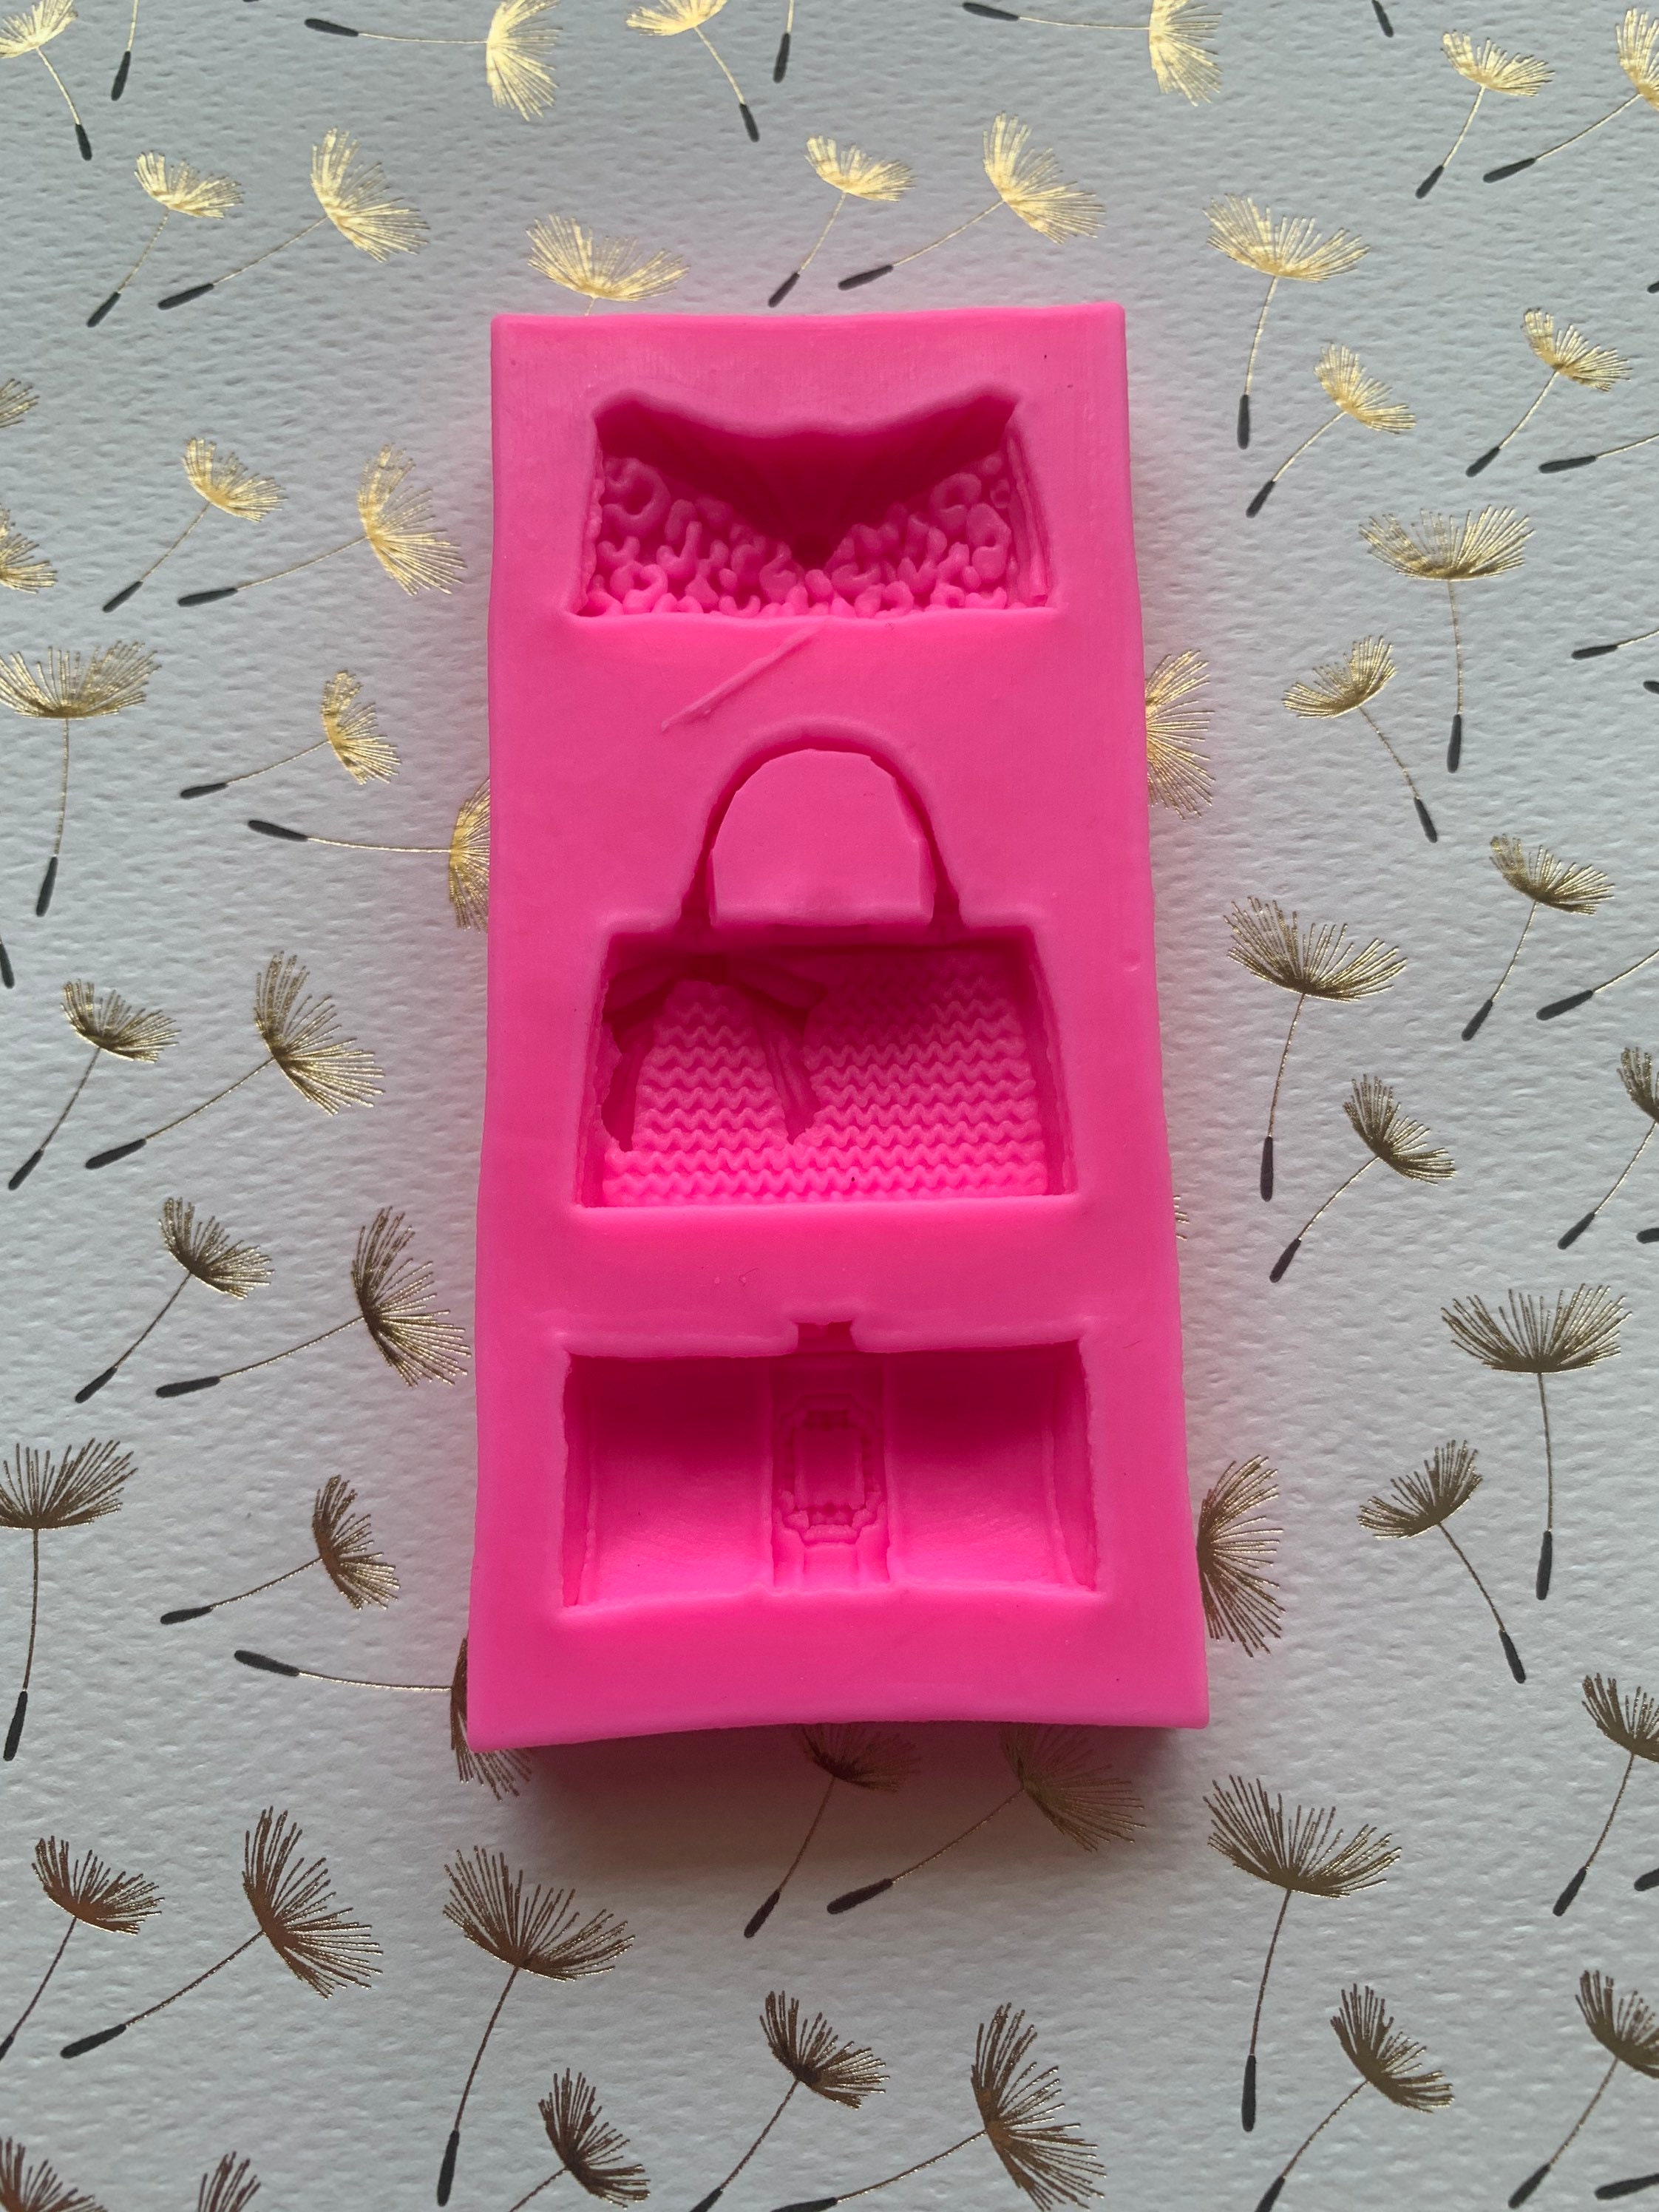 Small Purse - 3 Part Chocolate Mold